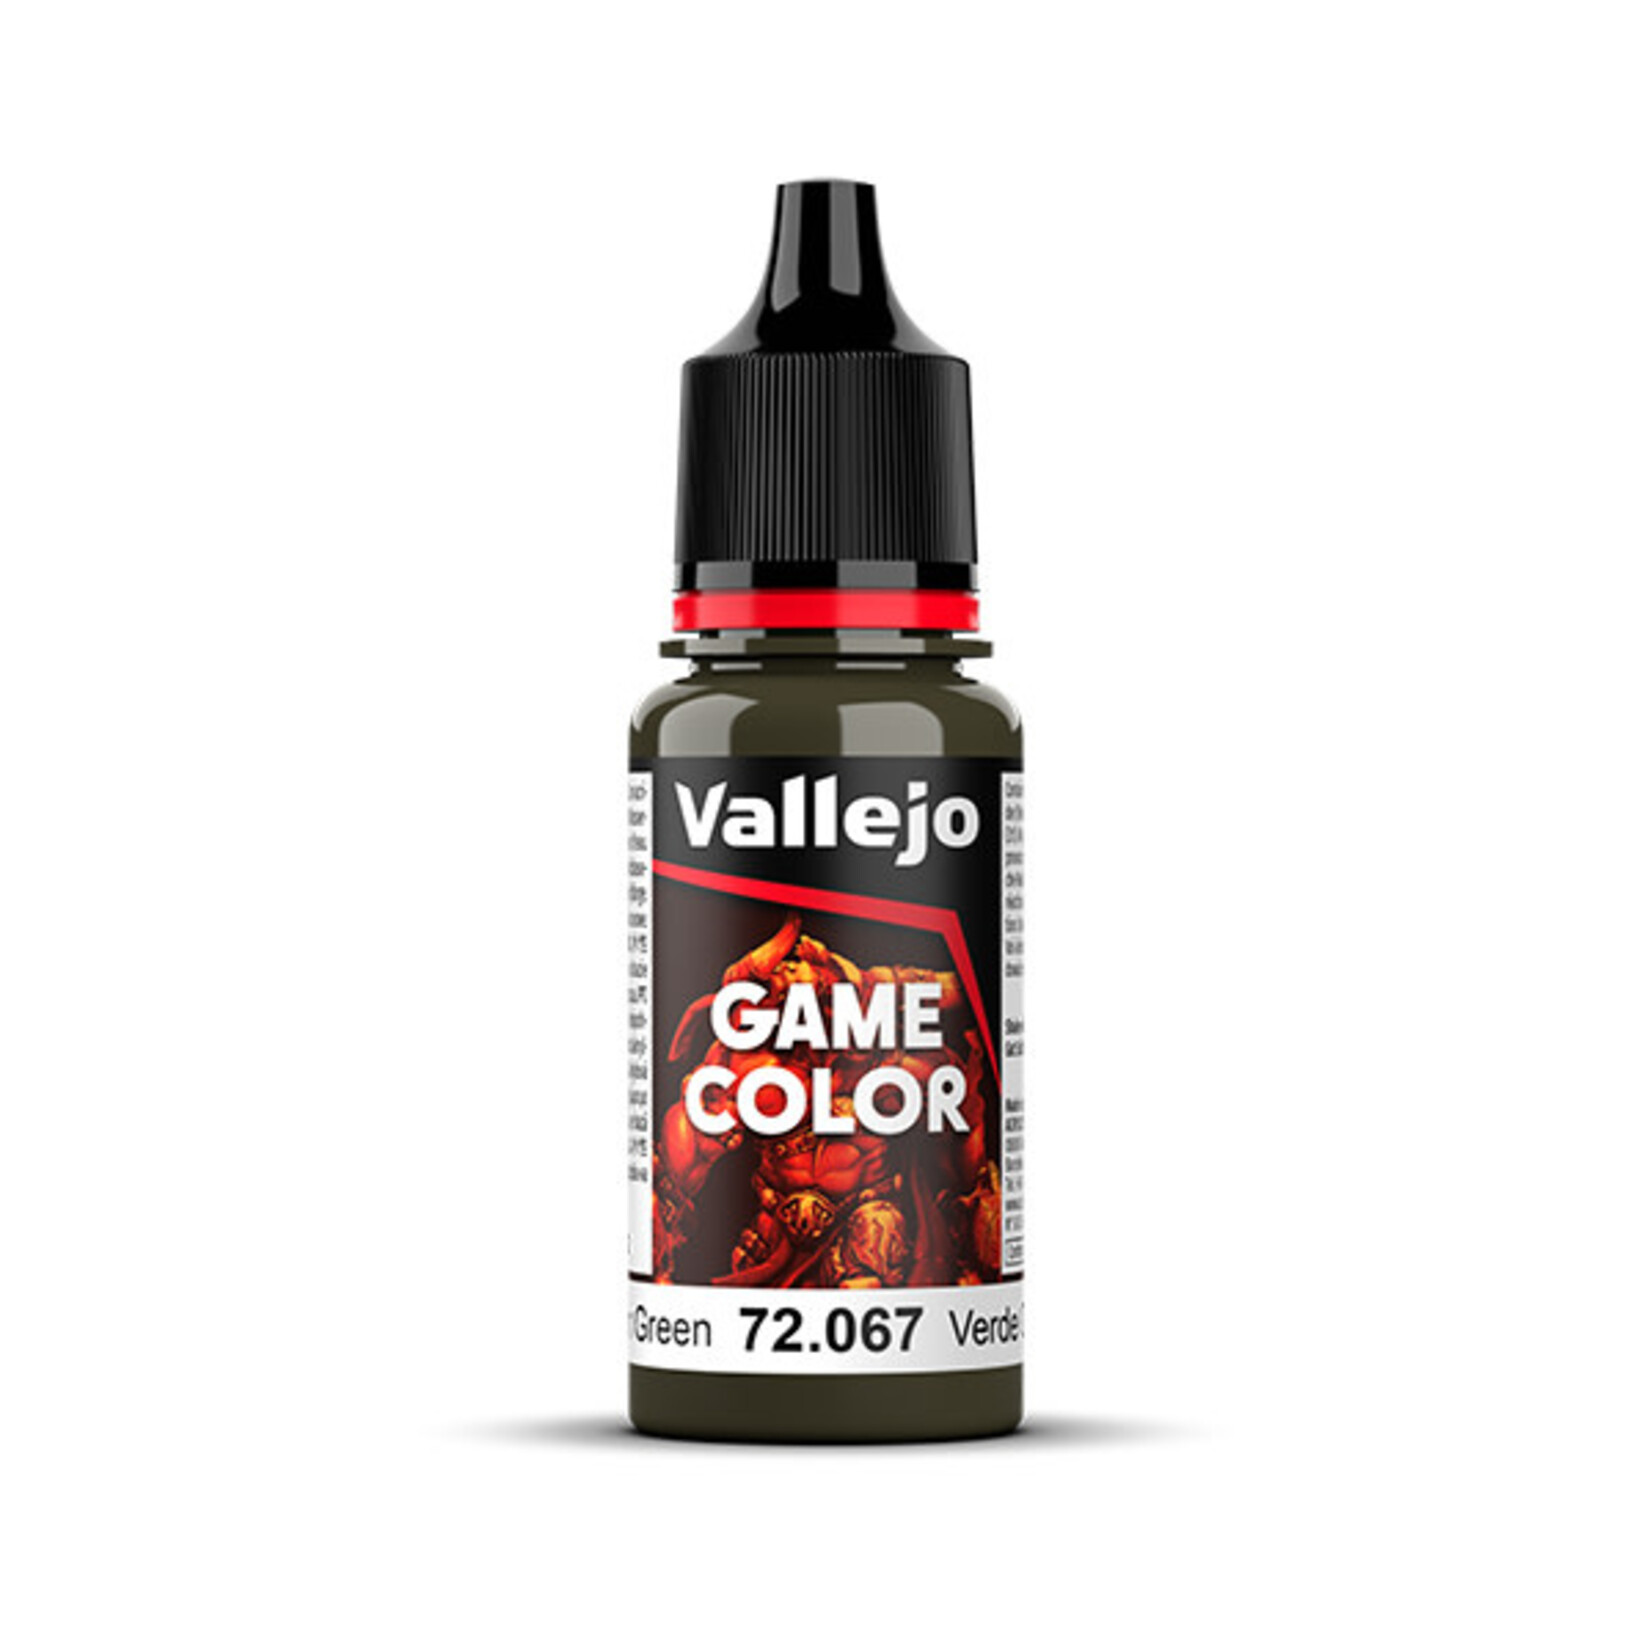 Vallejo Game Color Cayman Green